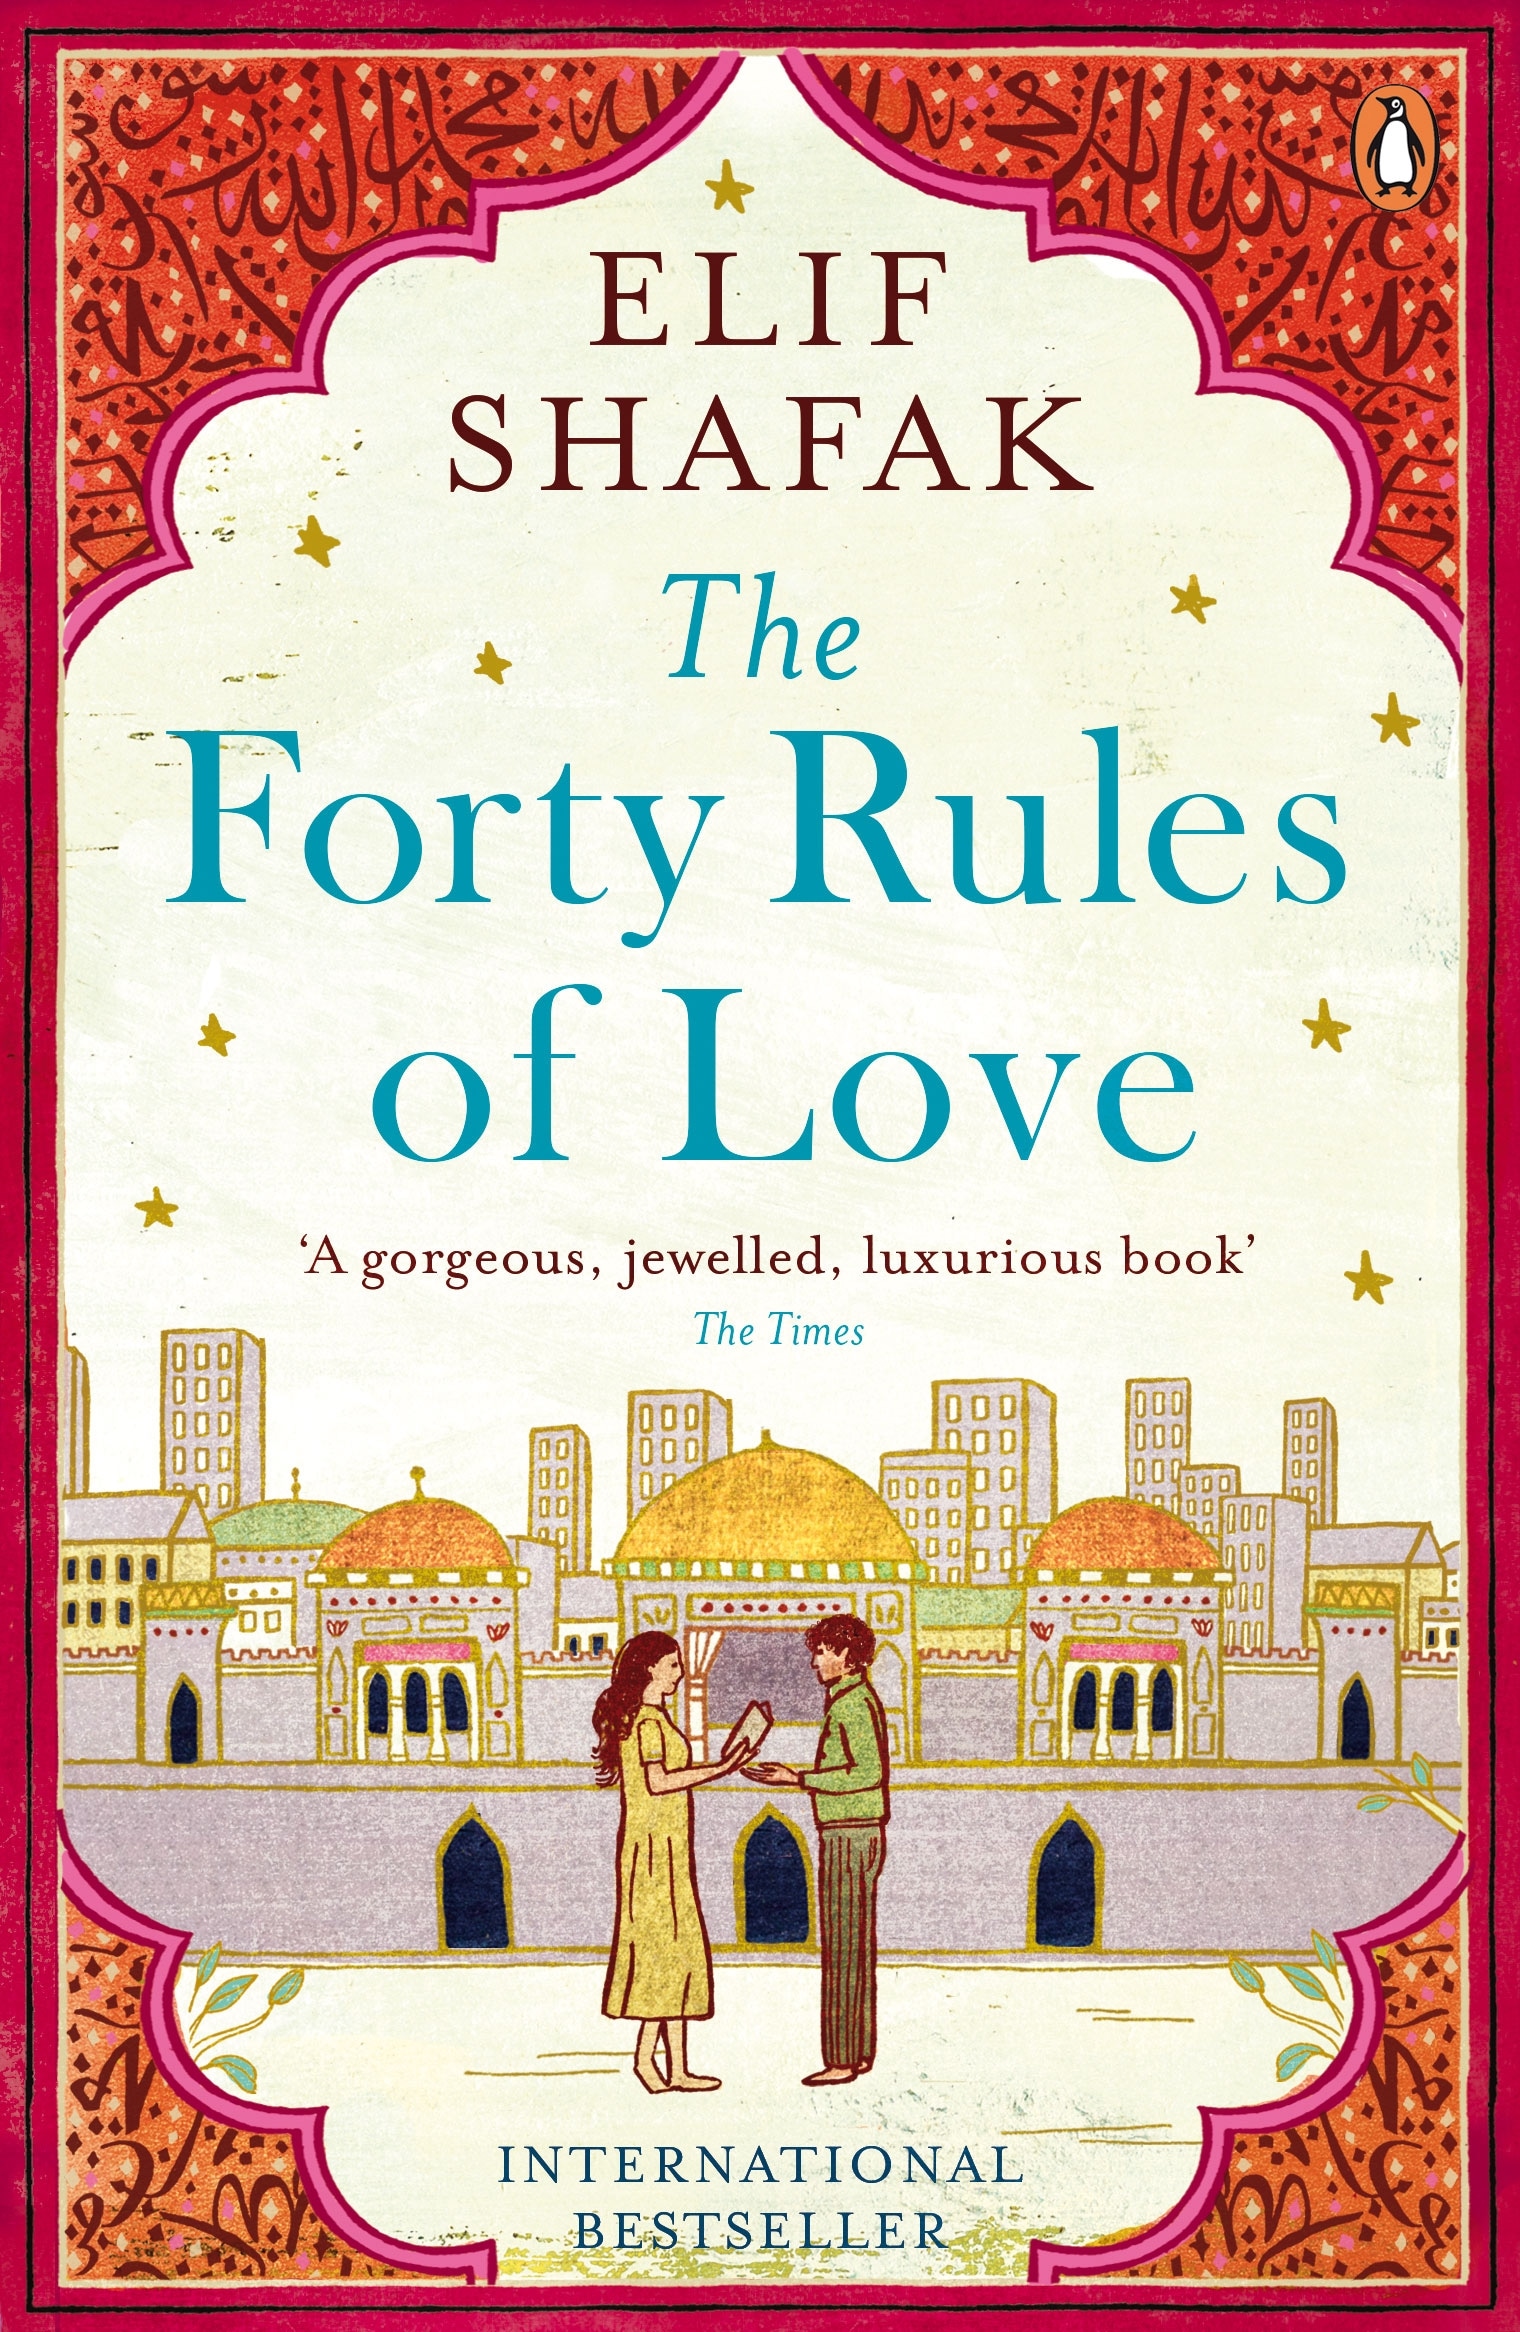 Book “The Forty Rules of Love” by Elif Shafak — April 2, 2015